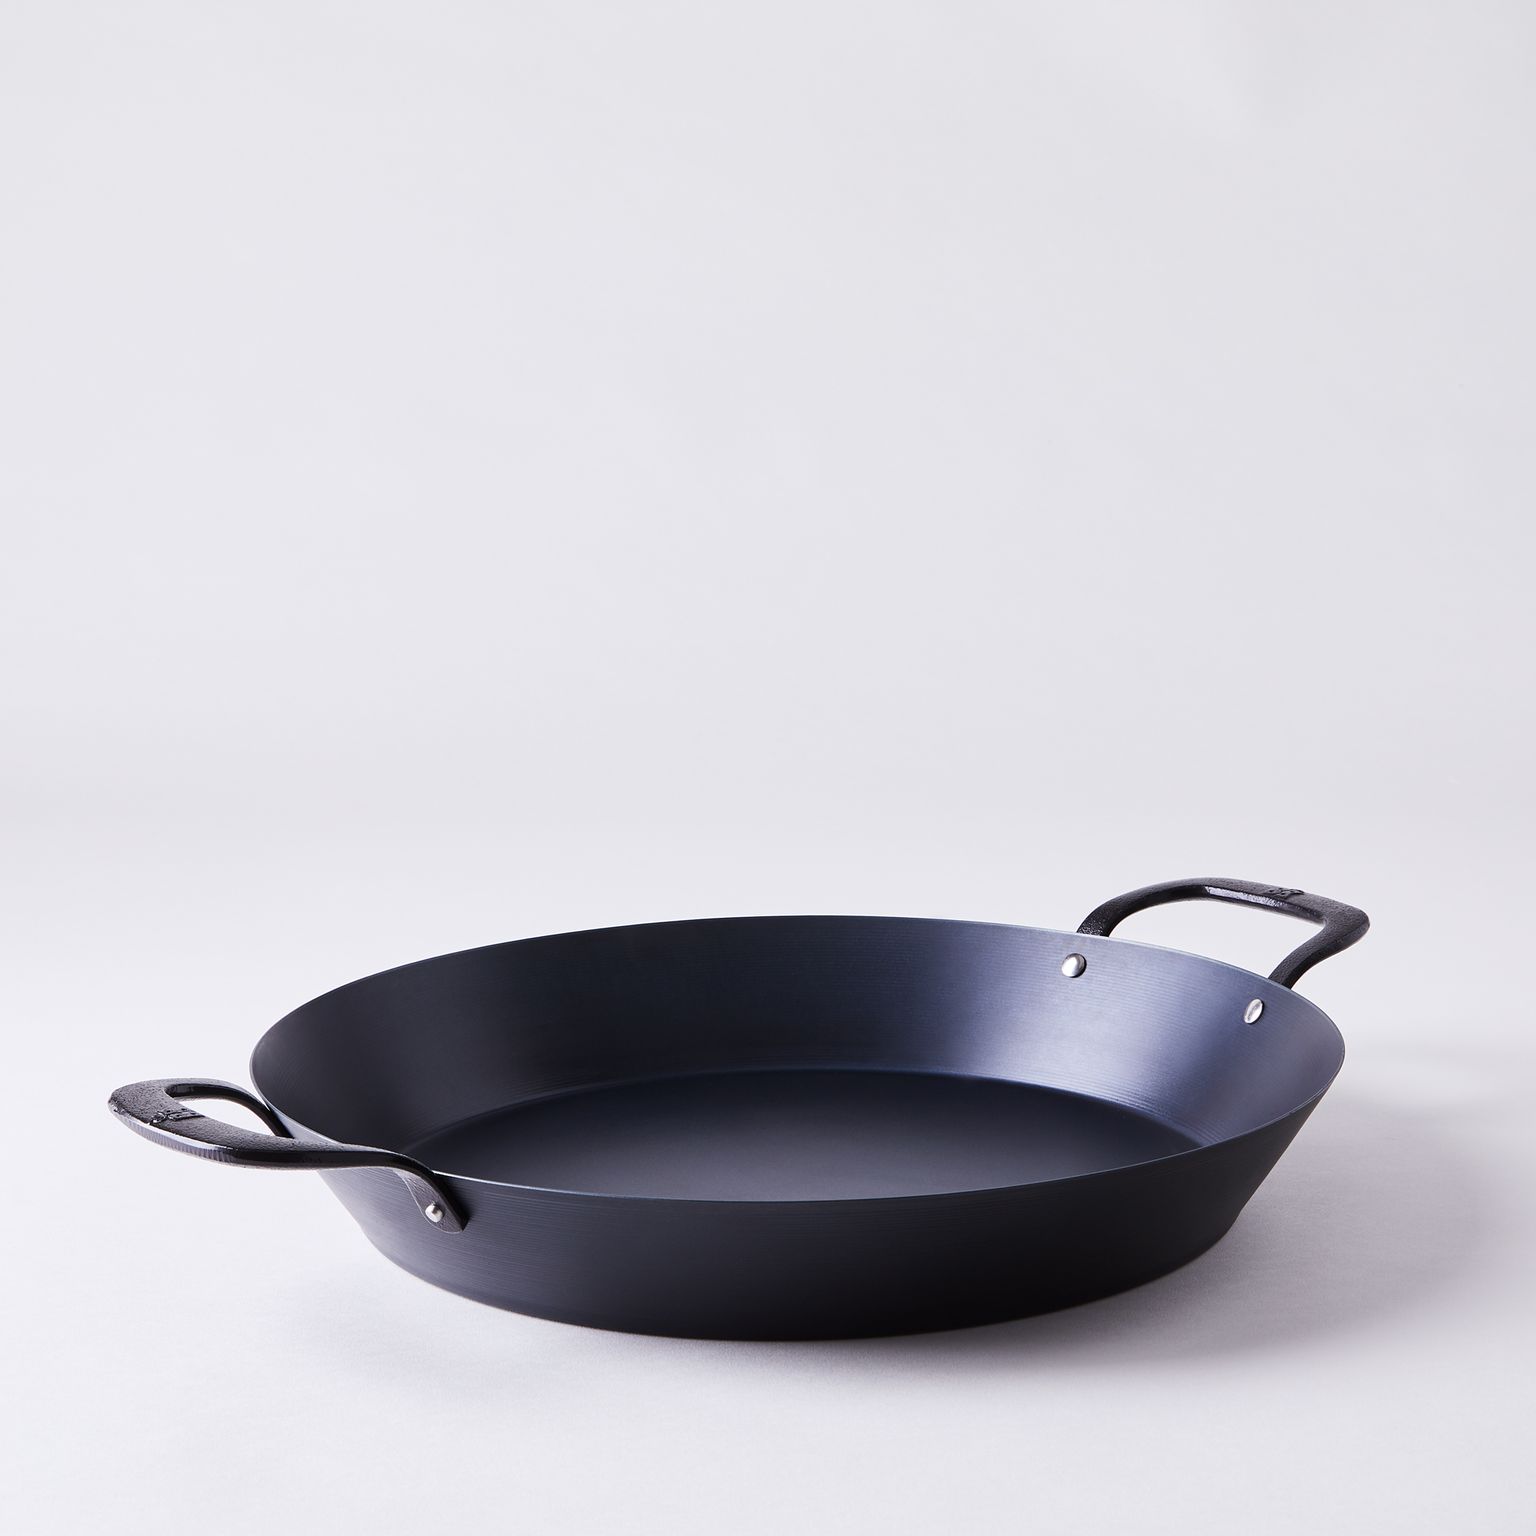 haag Dominant Skalk BK Steel Carbon Steel Paella Pan, 15", Cast Iron, Gets Nonstick With Time  on Food52